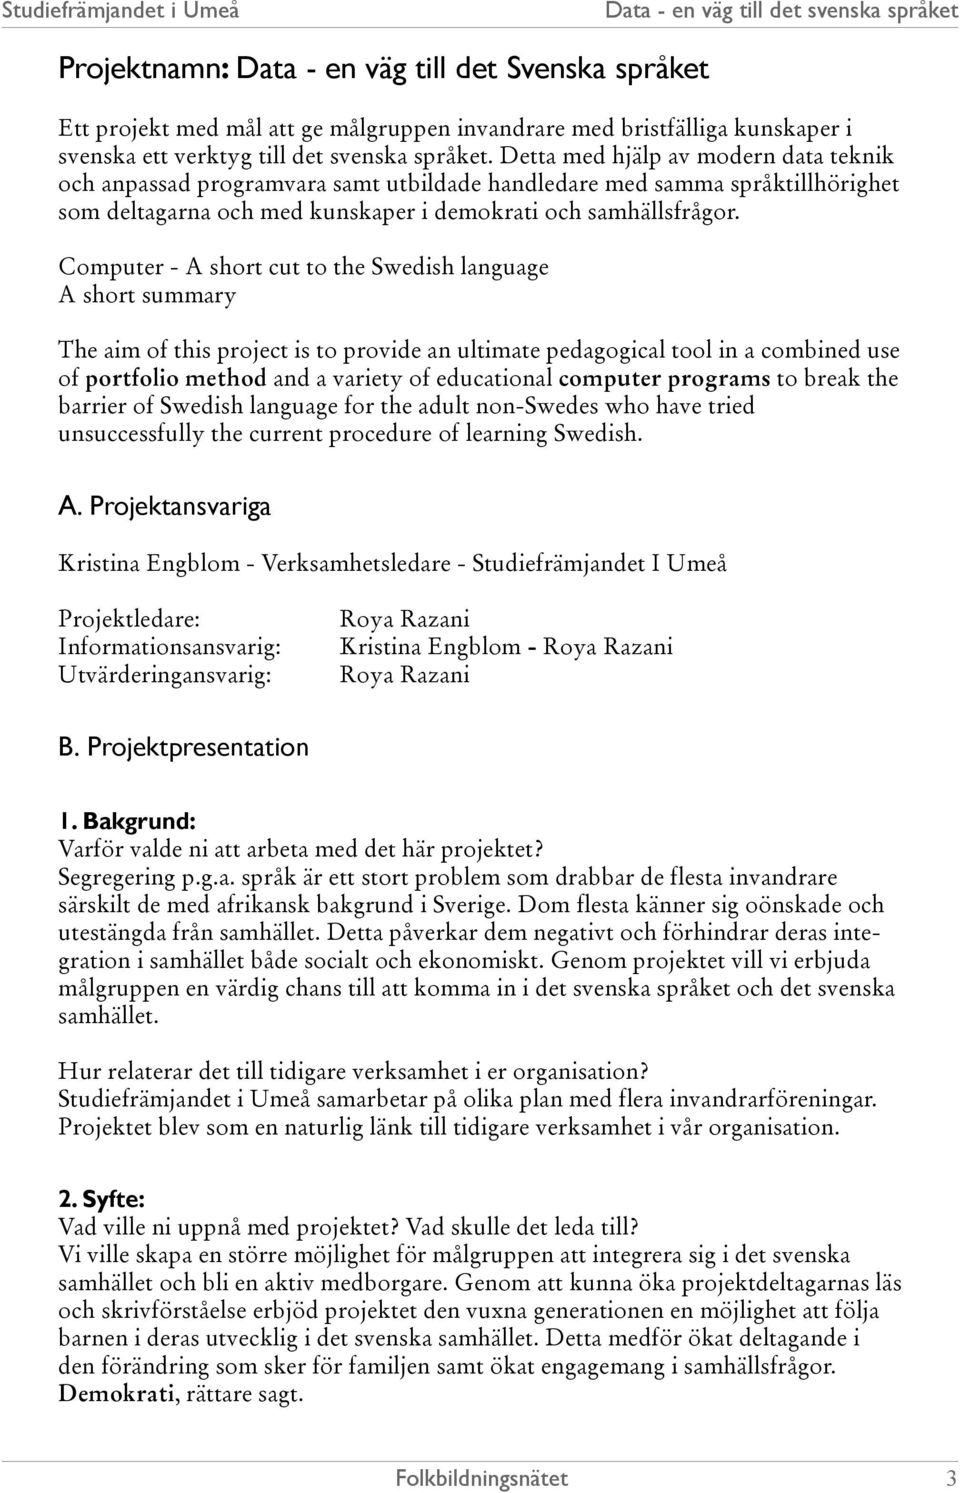 Computer - A short cut to the Swedish language A short summary The aim of this project is to provide an ultimate pedagogical tool in a combined use of portfolio method and a variety of educational